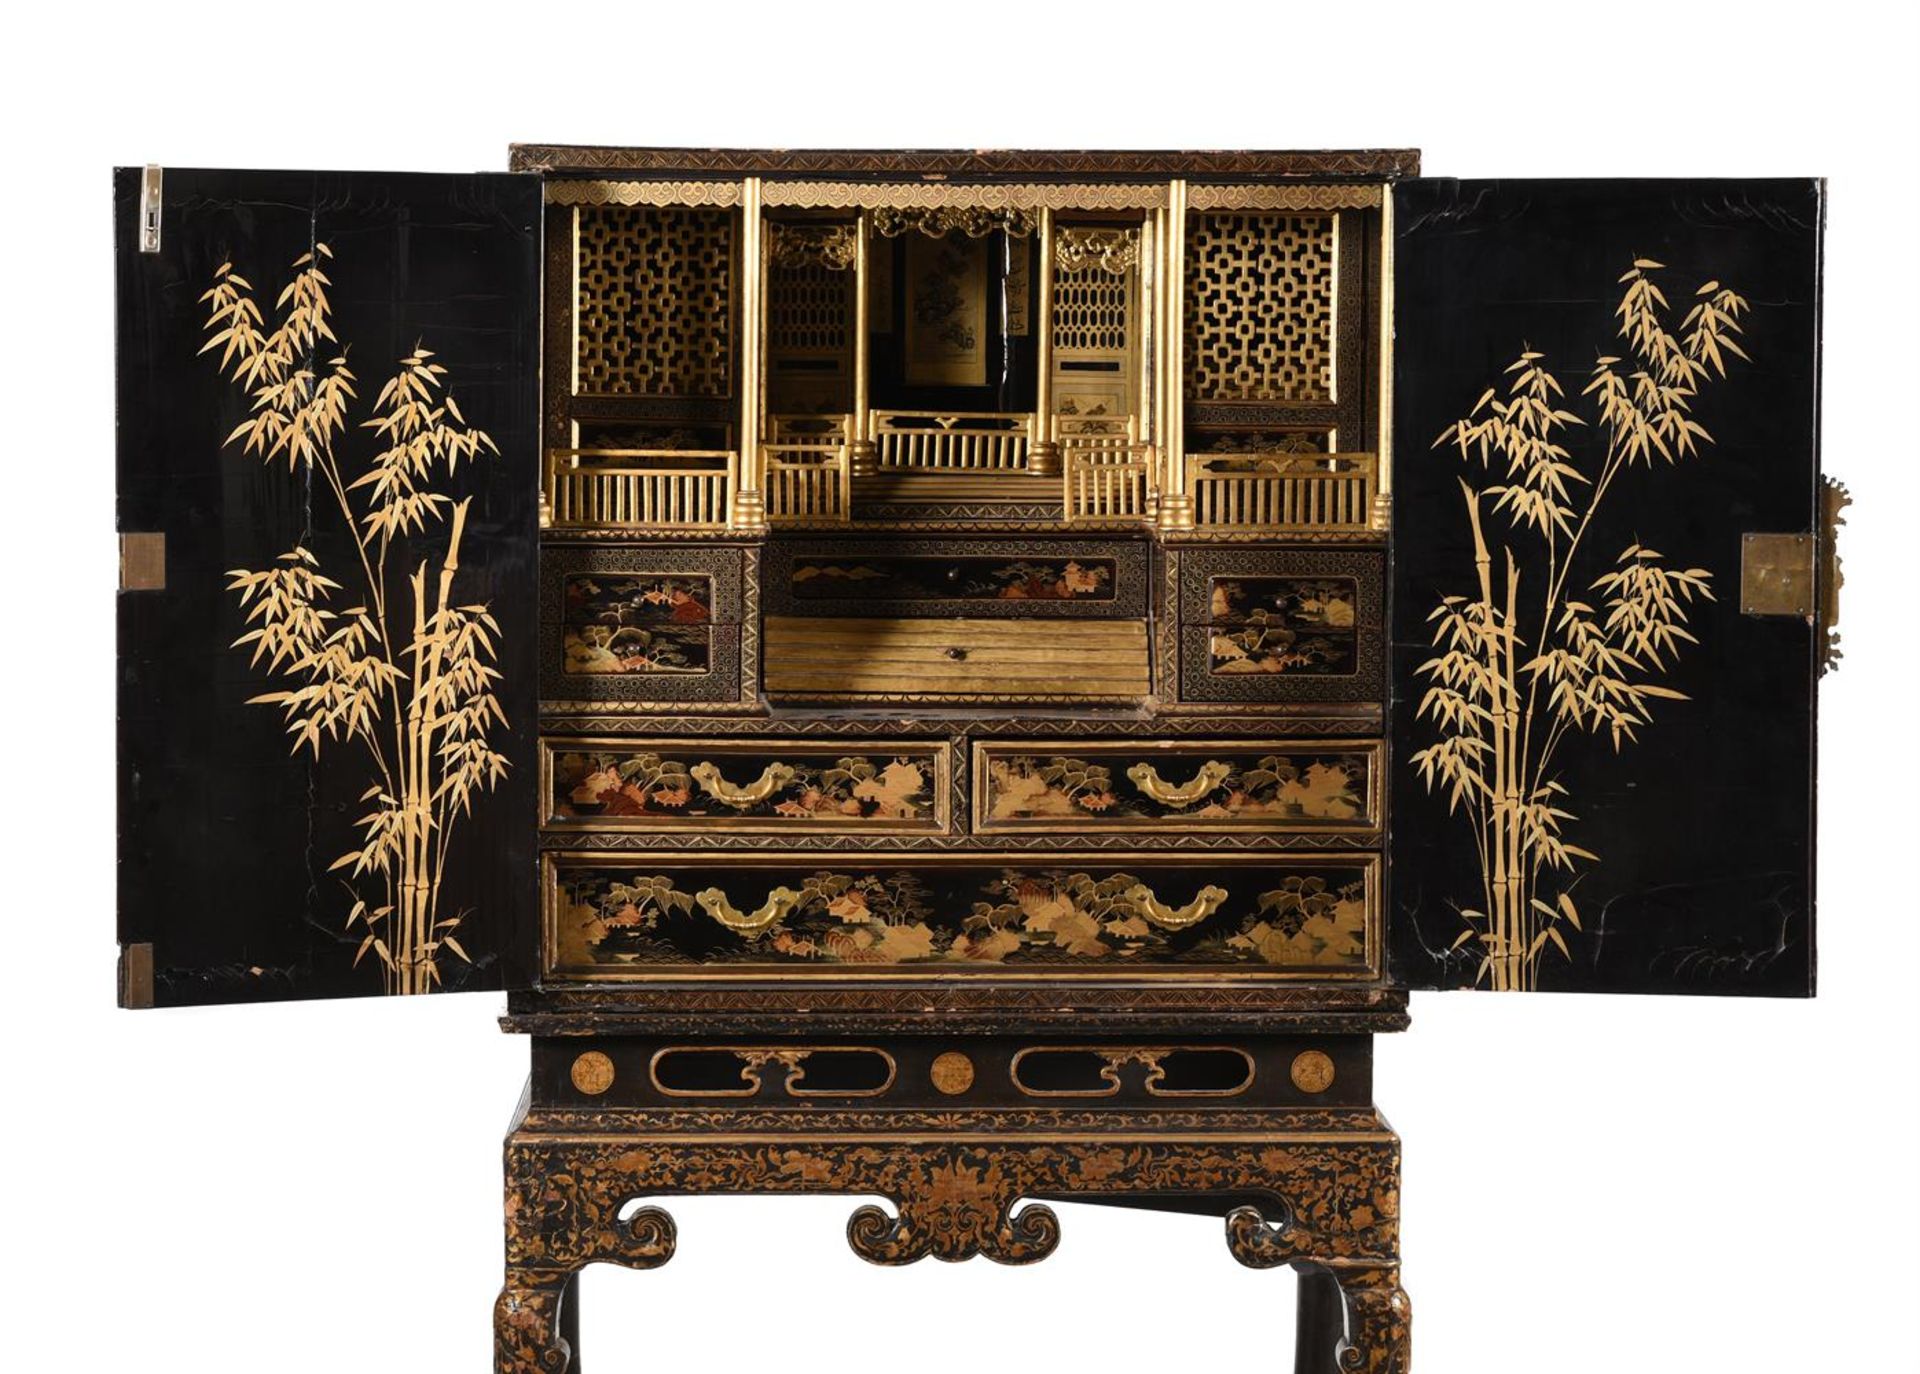 A CHINESE EXPORT LACQUER CABINET ON STAND, LATE 18TH OR EARLY 19TH CENTURY - Bild 3 aus 15